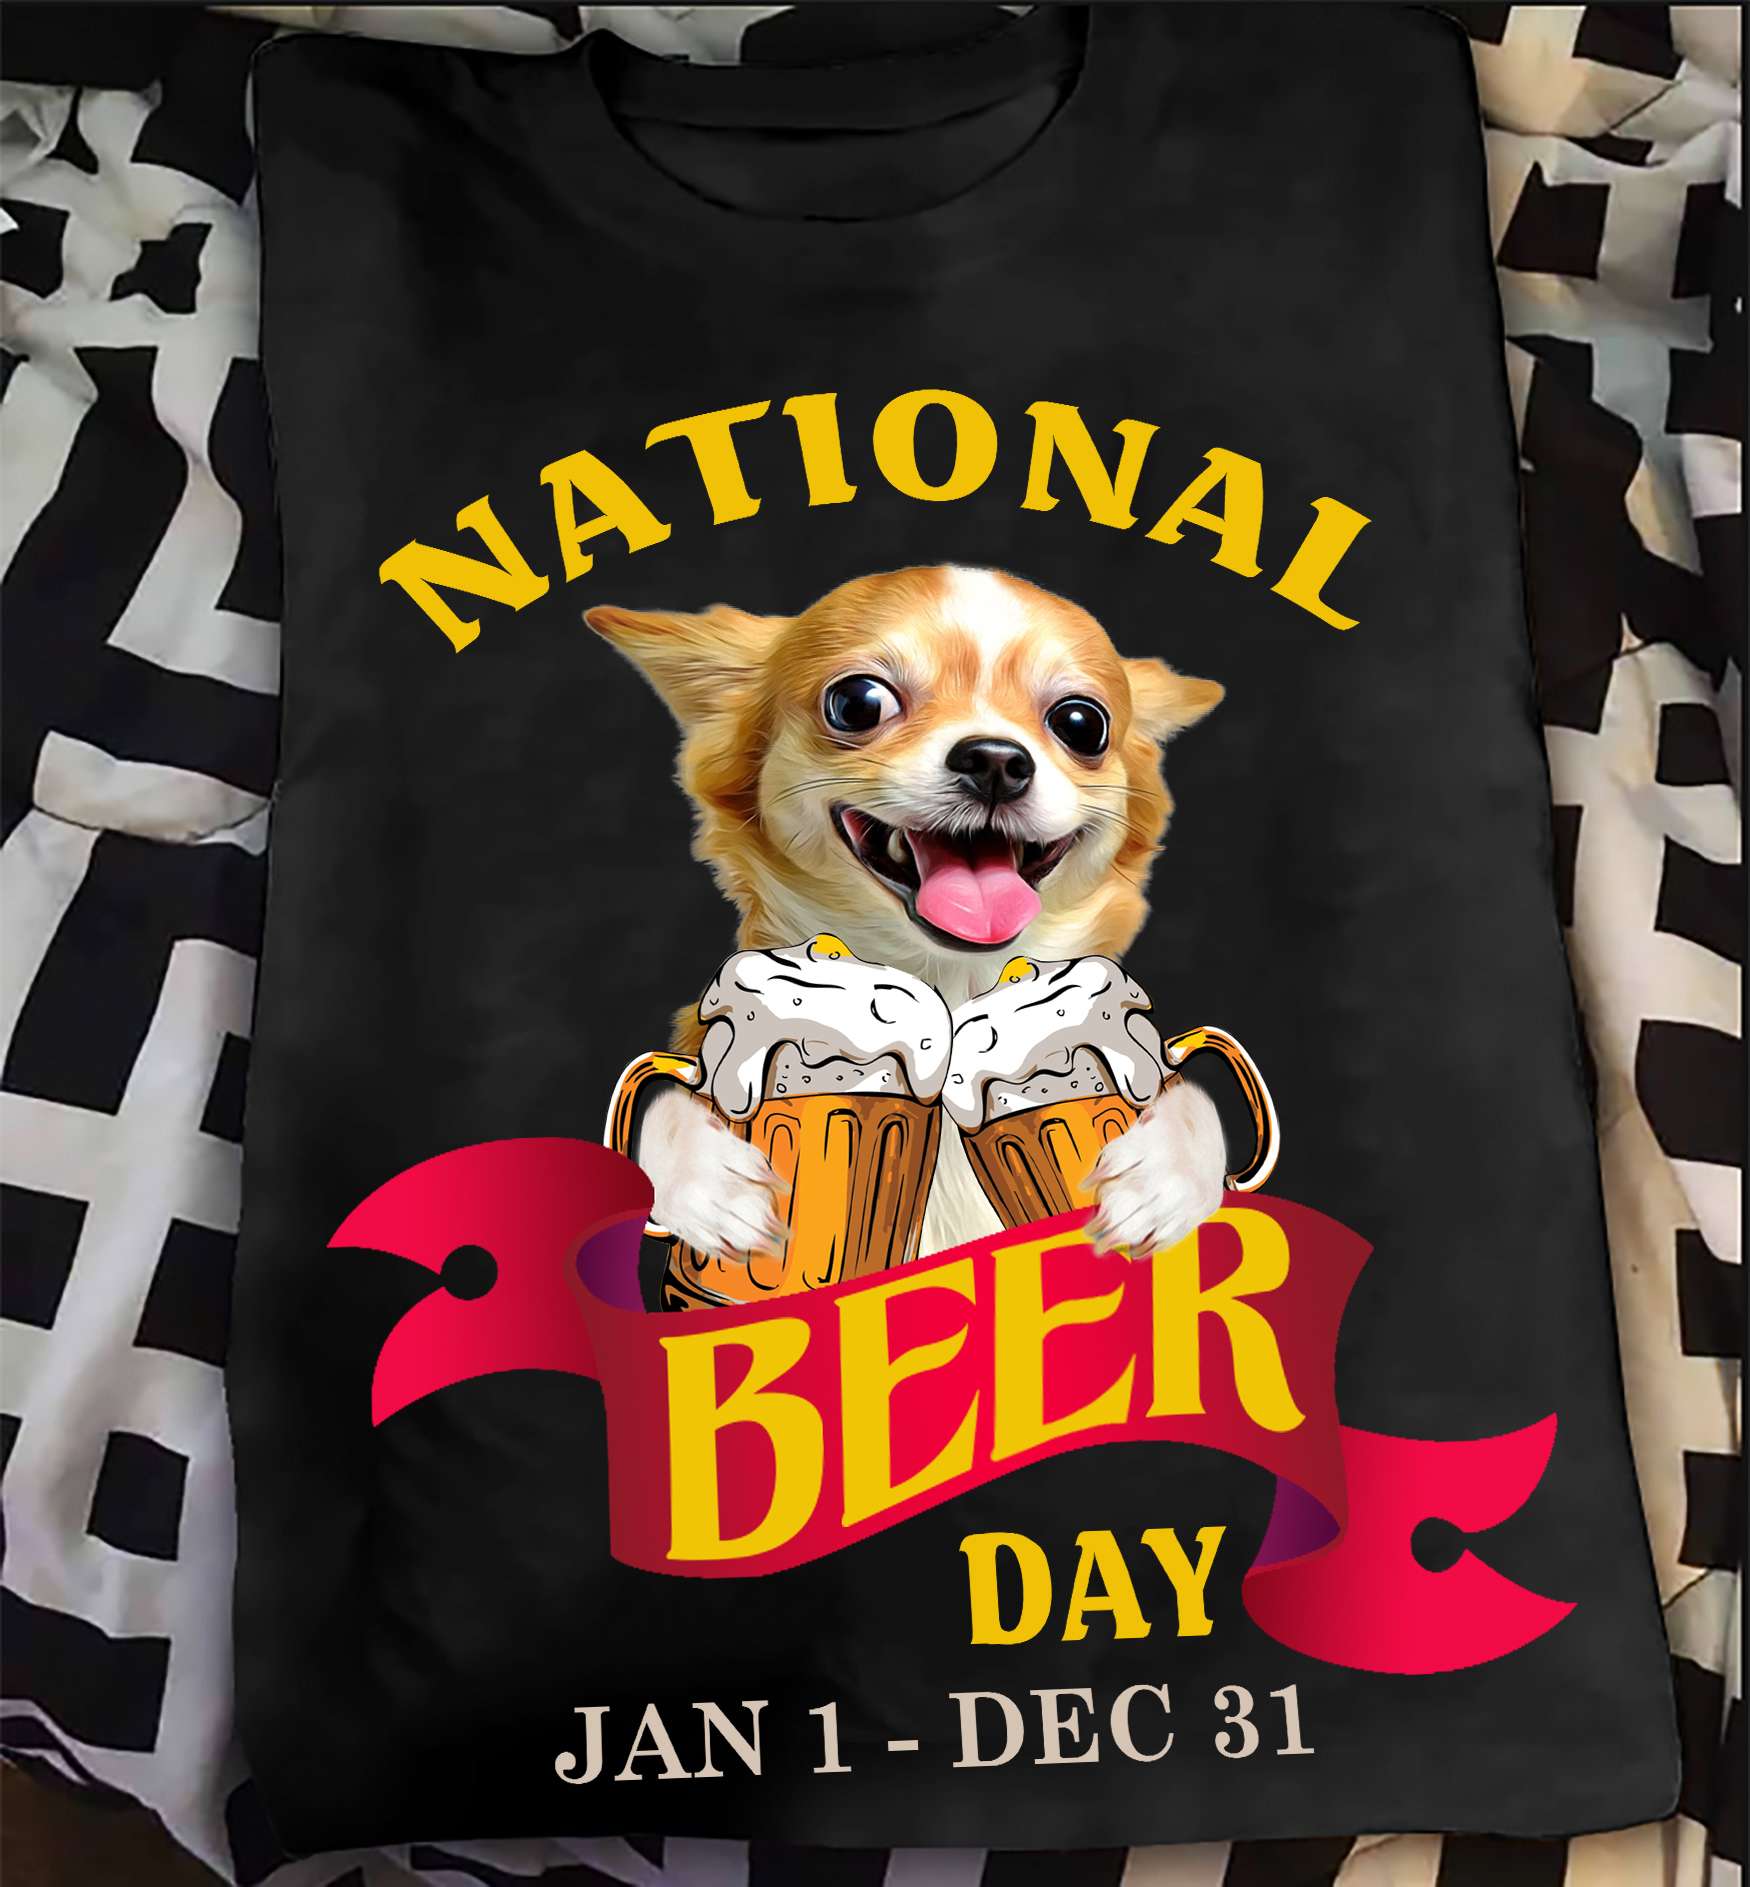 National beer day - Chihuahua and beer, dog lover